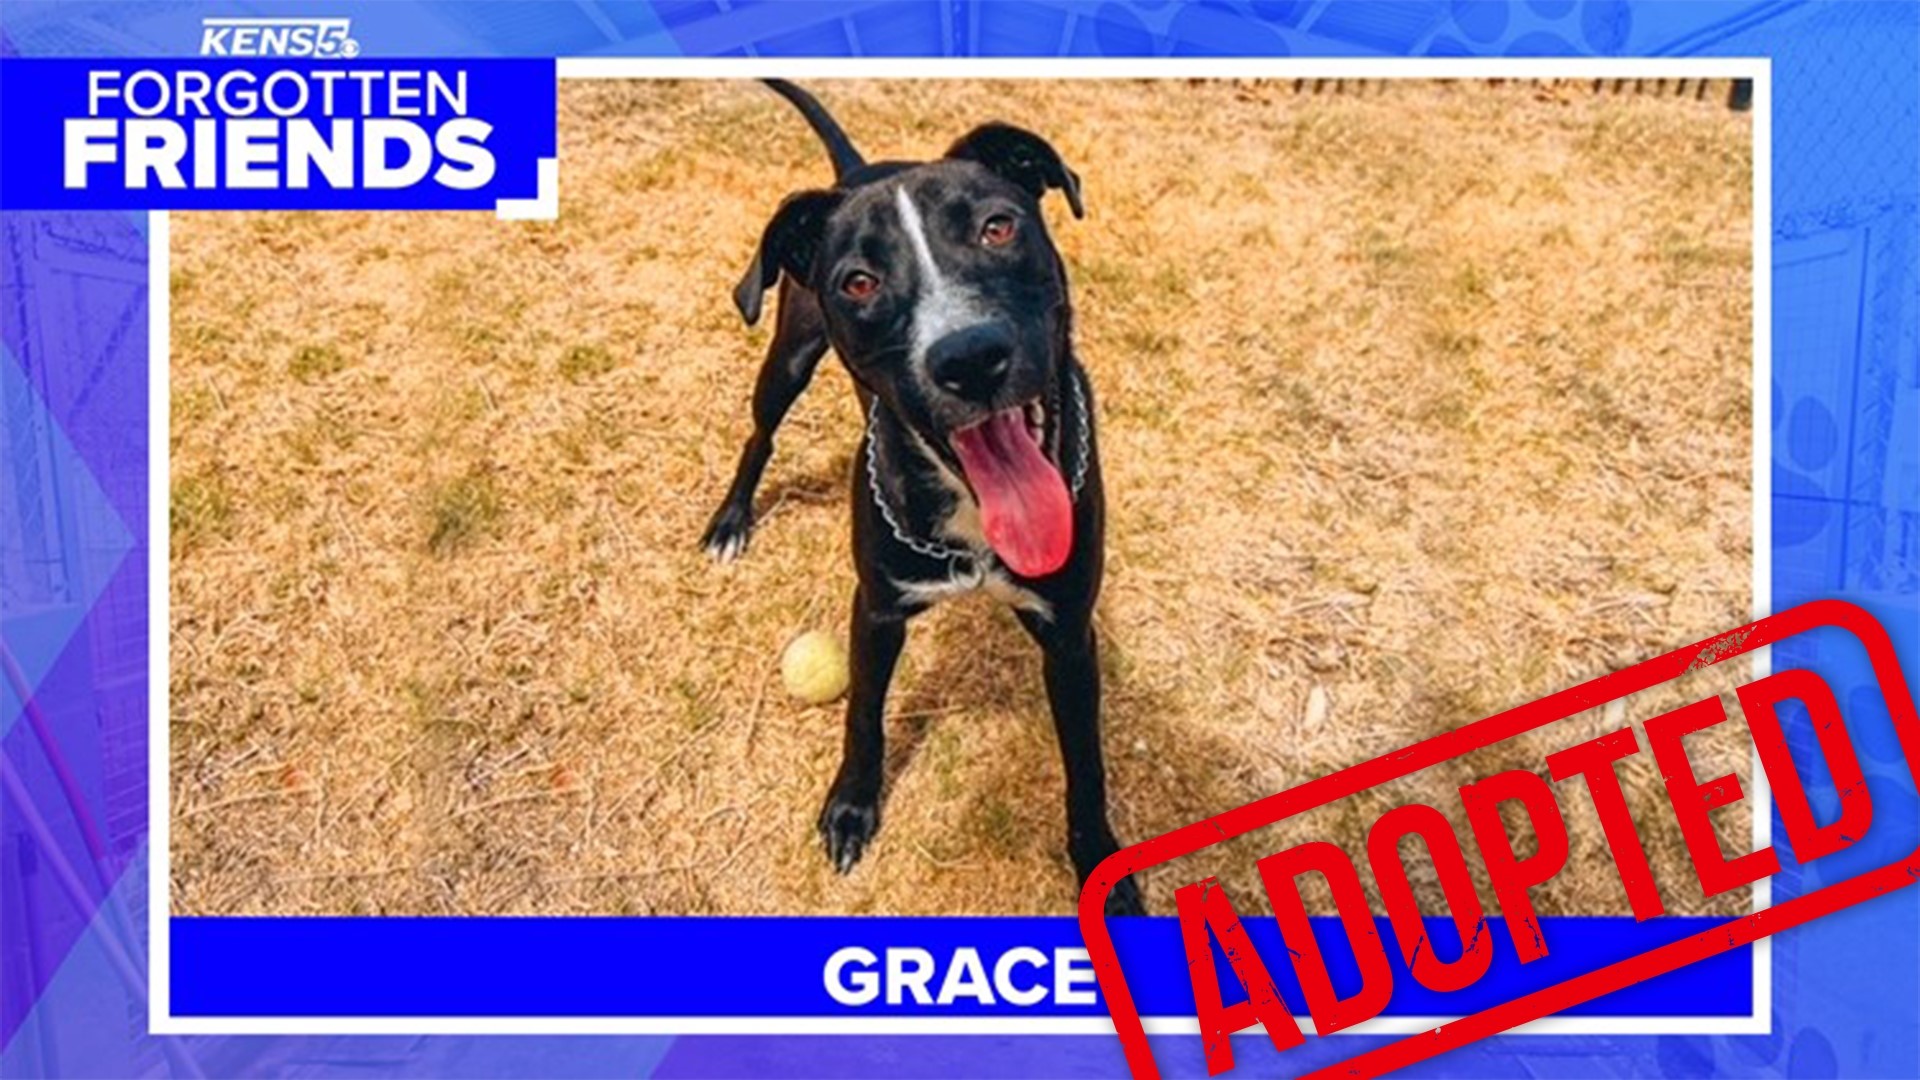 Grace is a 1-year-old Labrador mix with lots of energy who just wants to belong to someone and be loved.